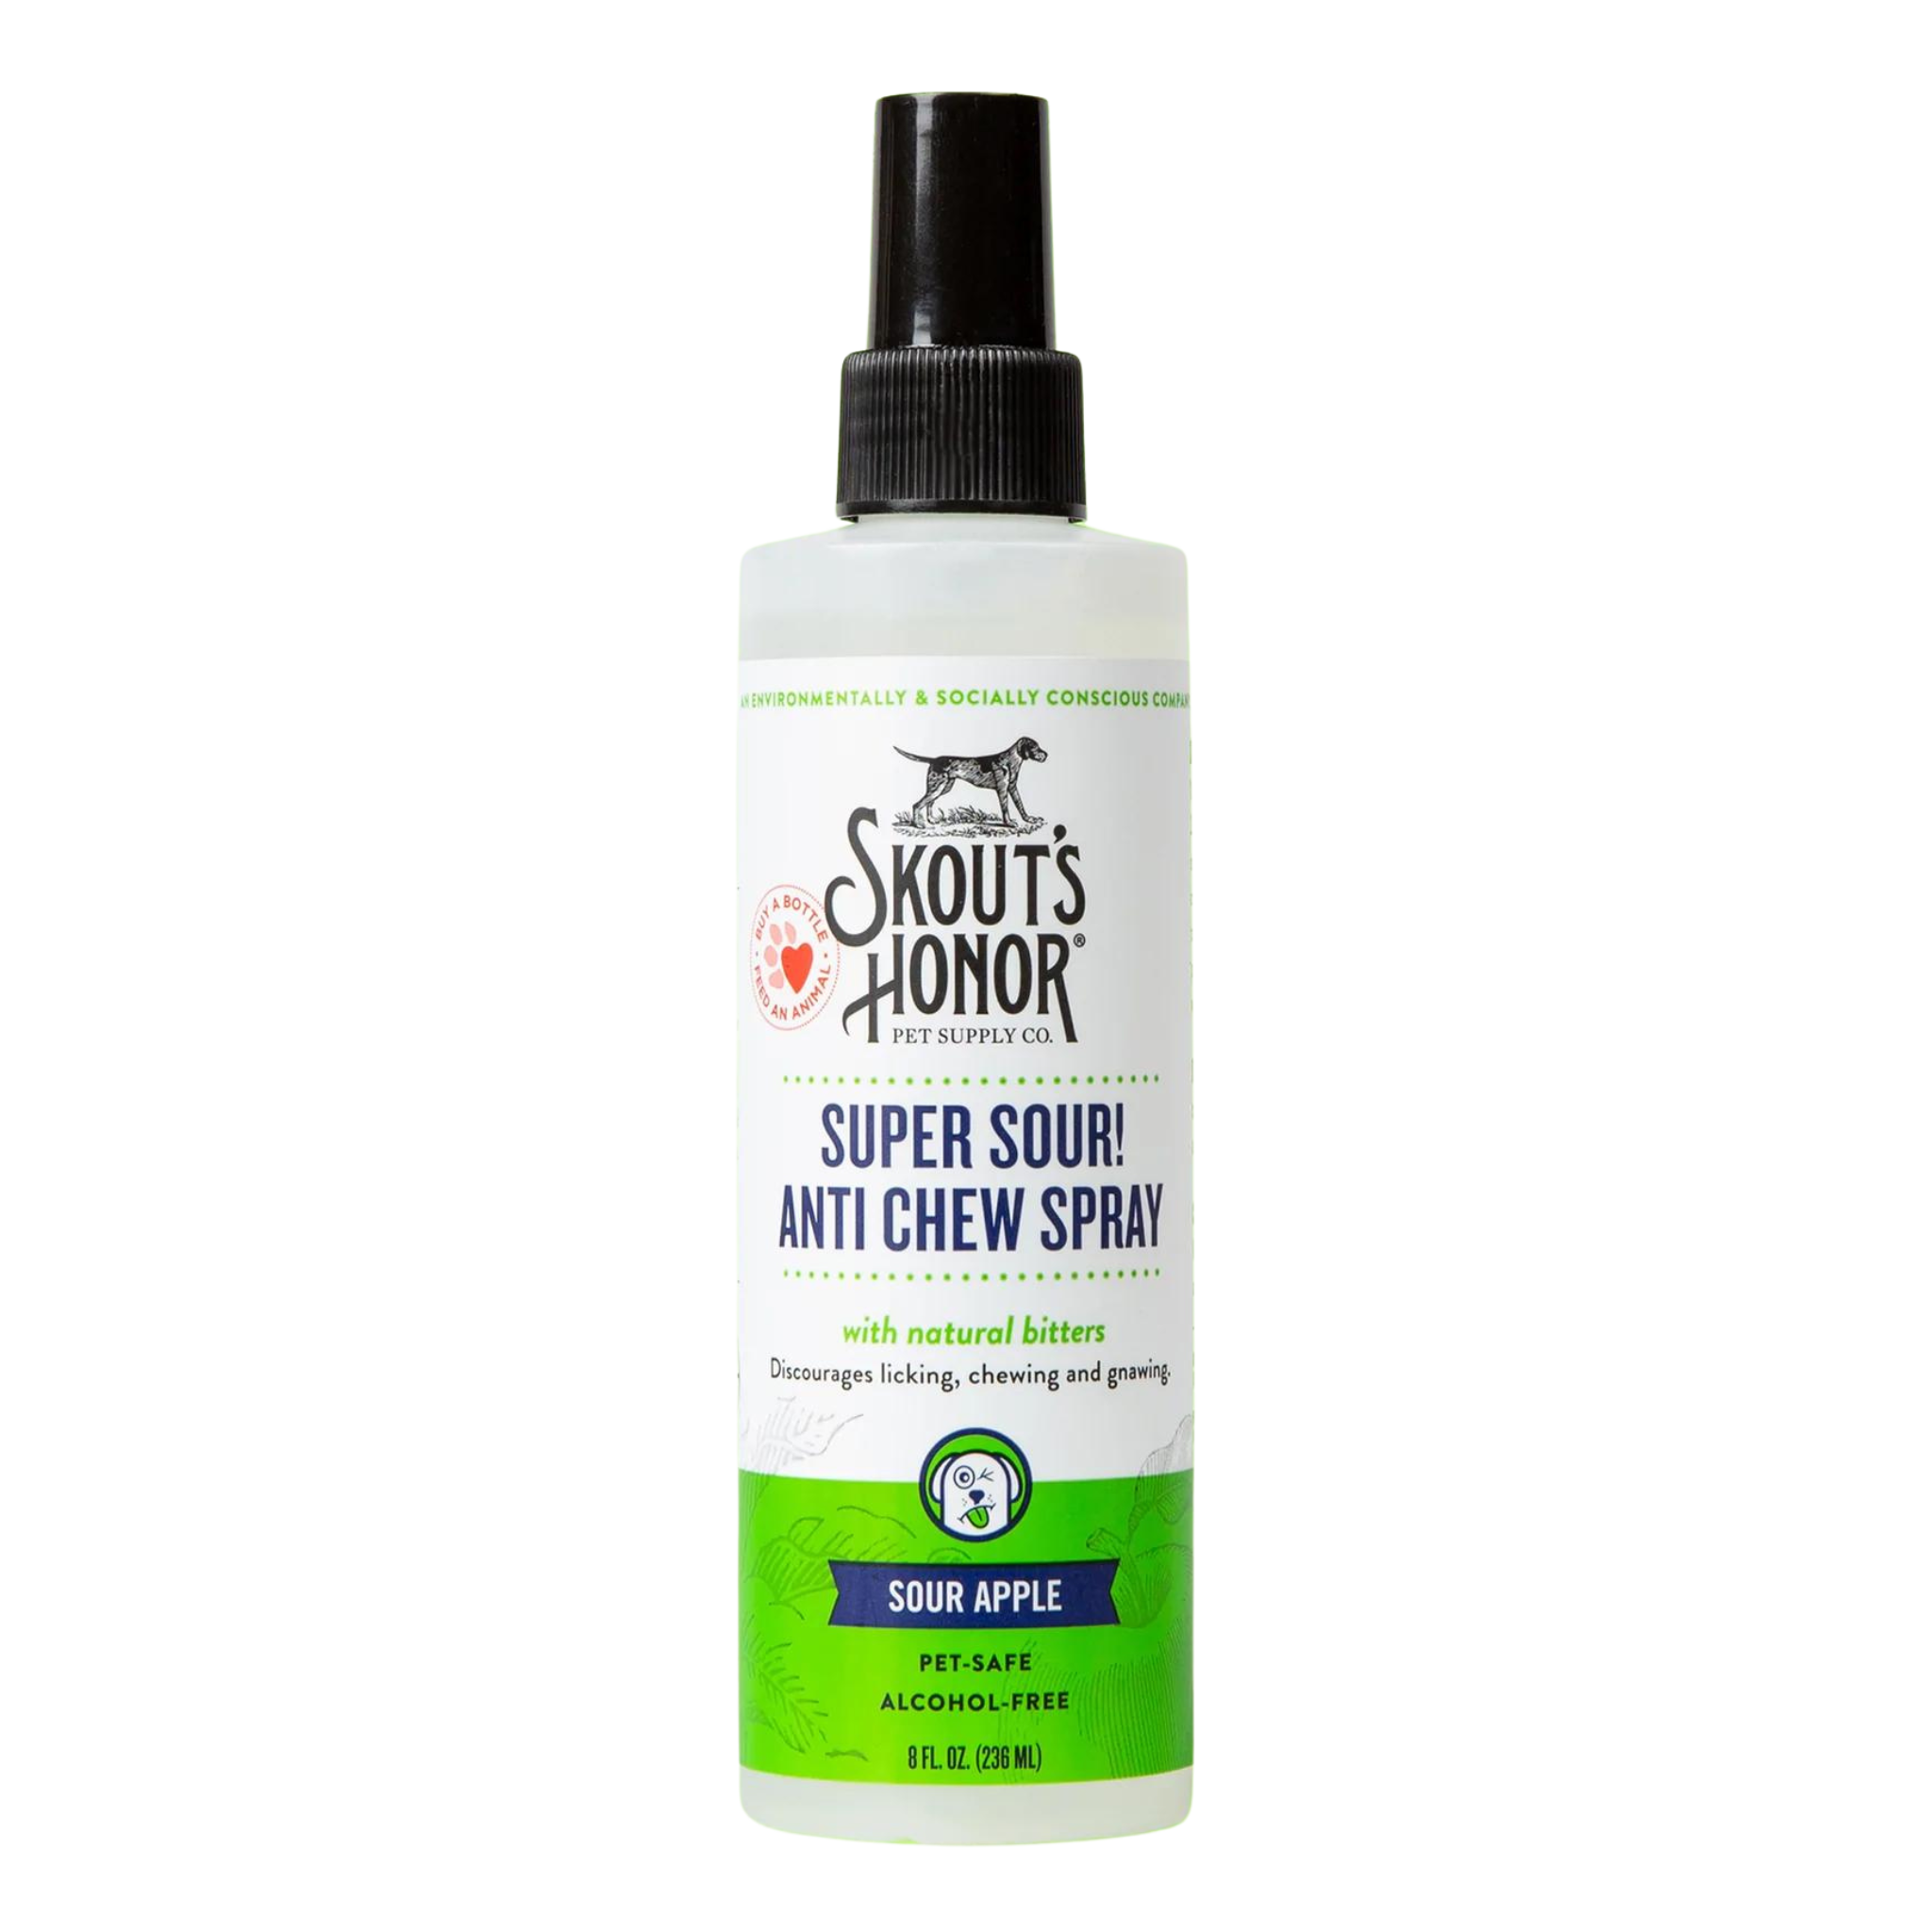 Skout's Honor Super Sour! Anti-Chew Spray for Dogs